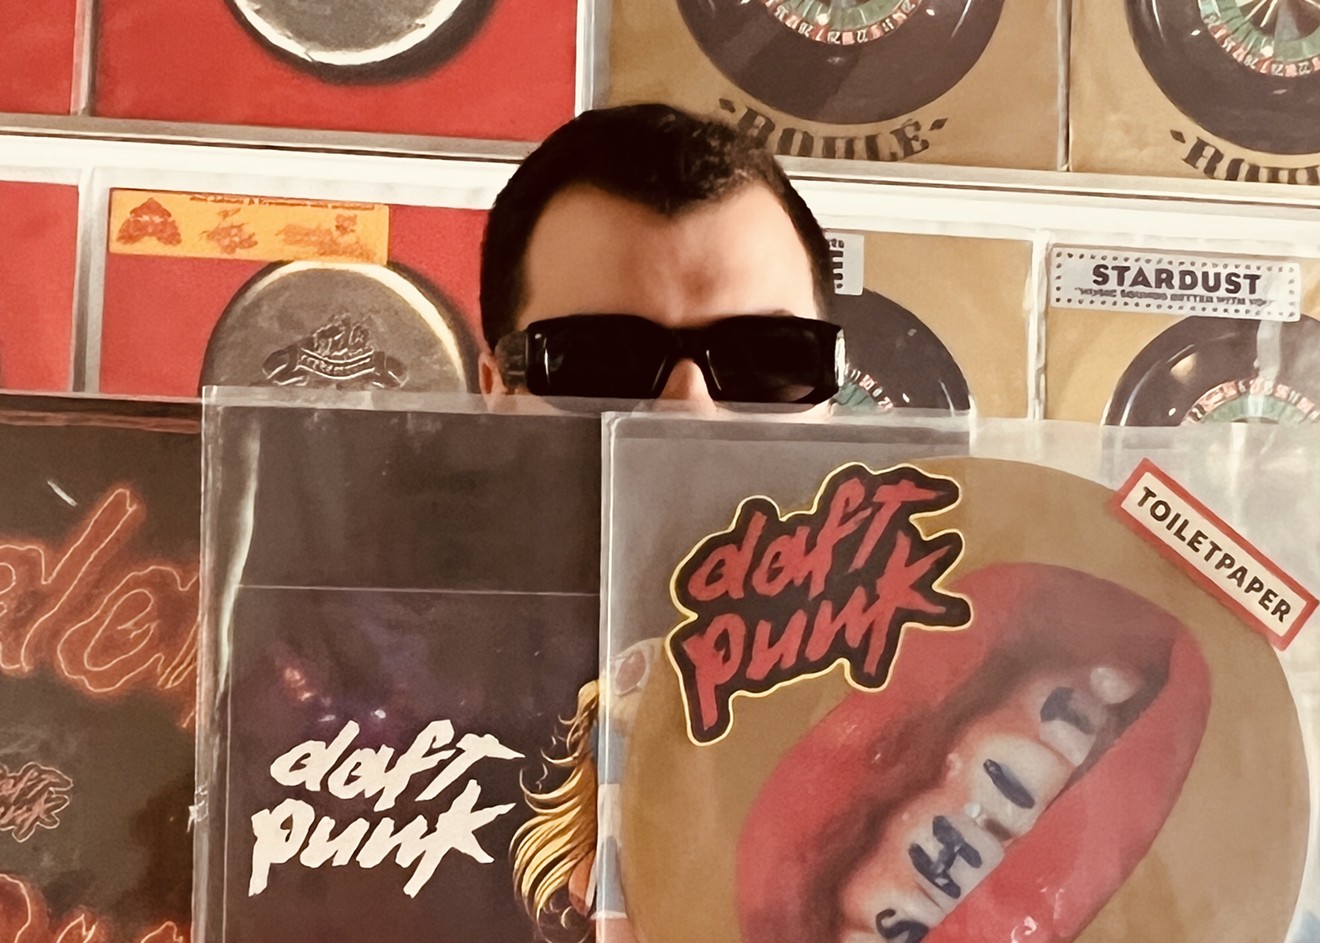 Fruit Fly Records owner Giovanni Hanna poses with a few records from his Daft Punk collection.